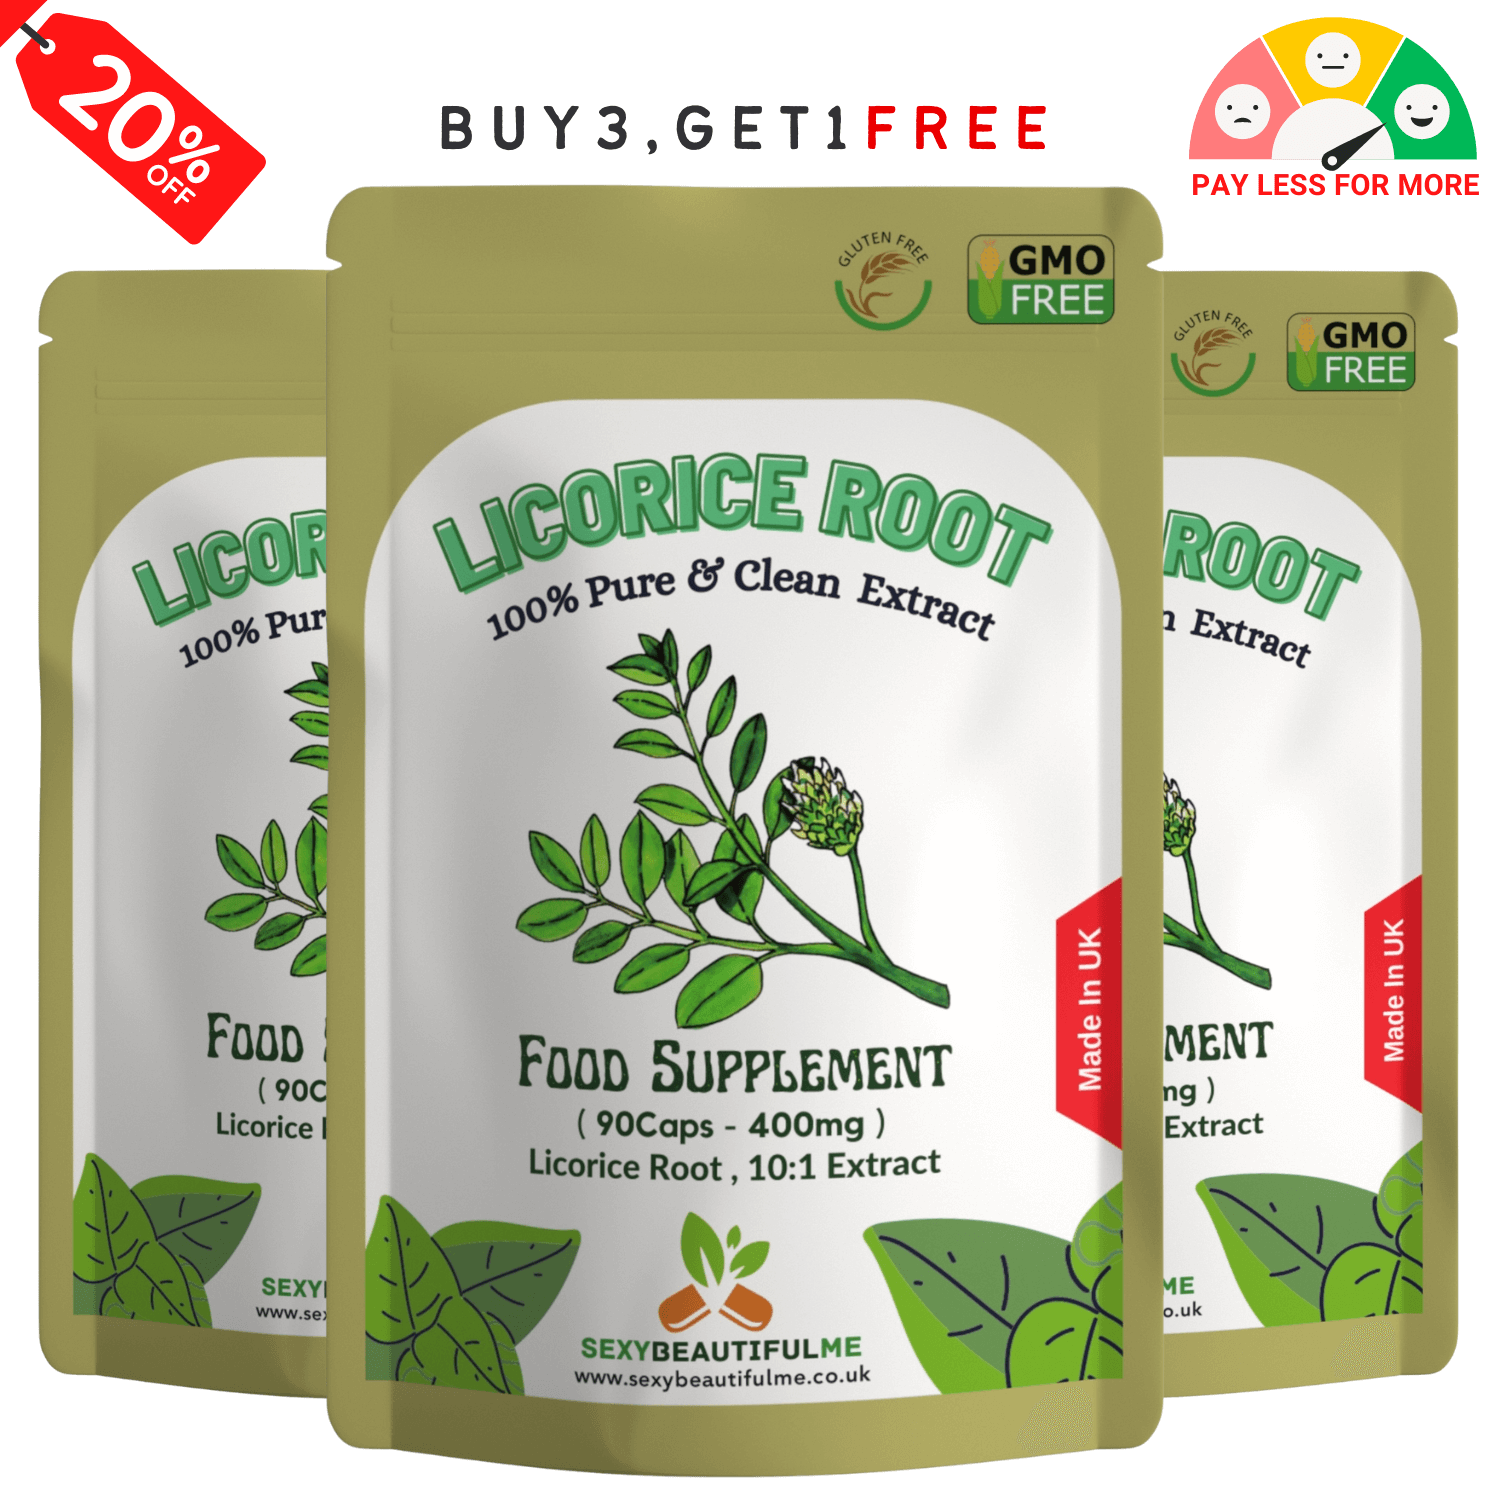 Licorice Root Extract Capsules 4000mg-Vegan Capsules – Digestion System Support